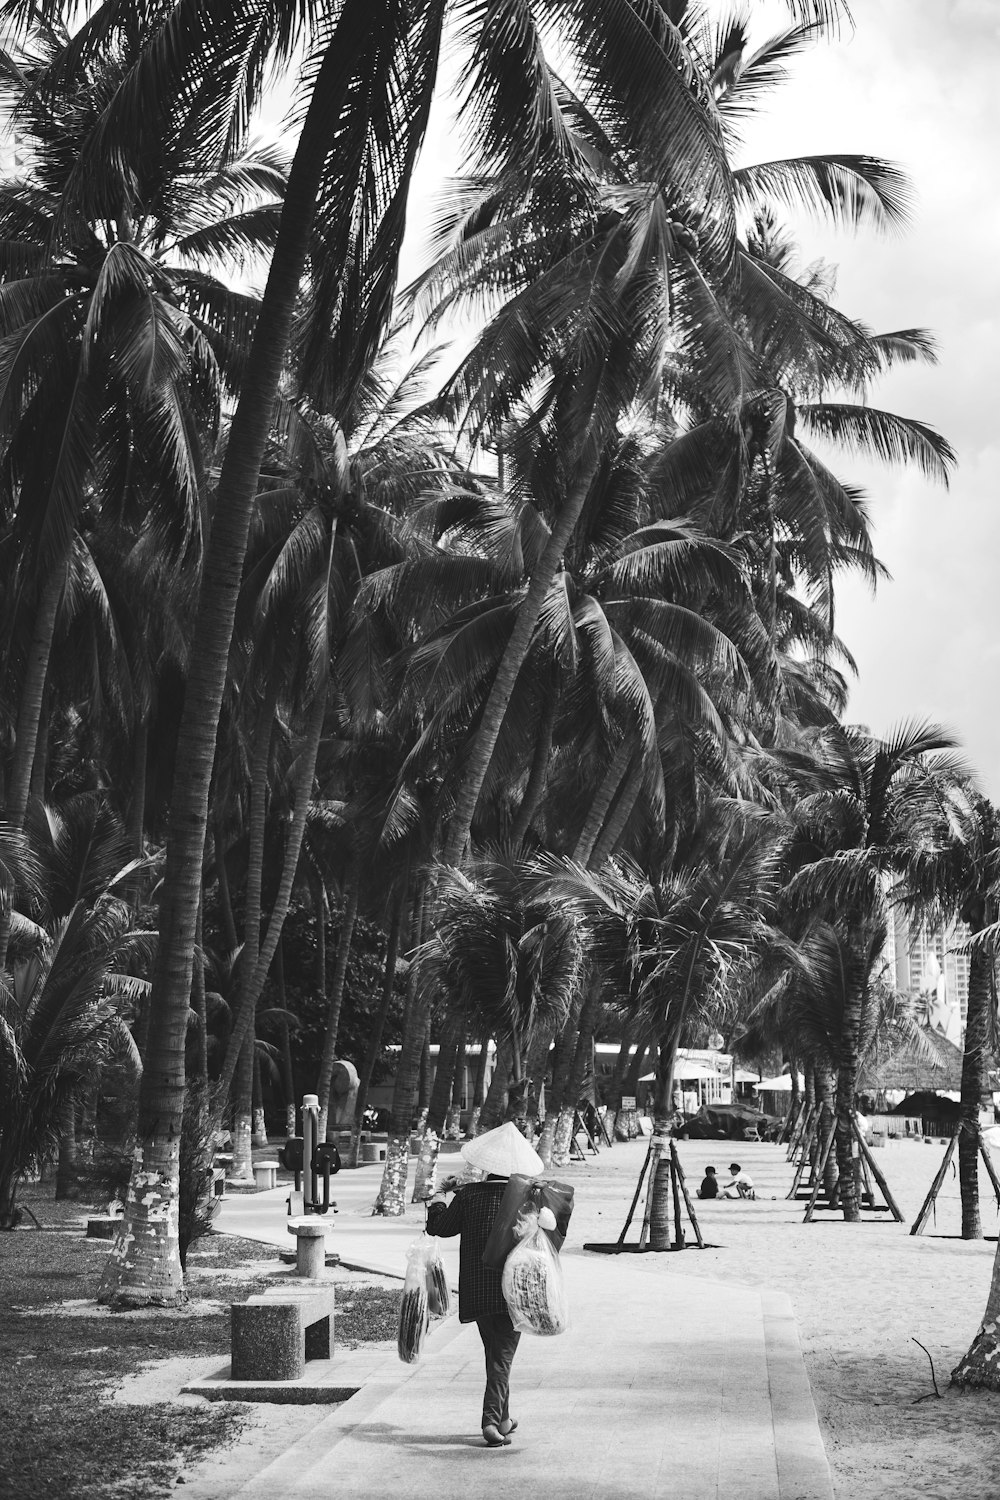 a black and white photo of a person with an umbrella